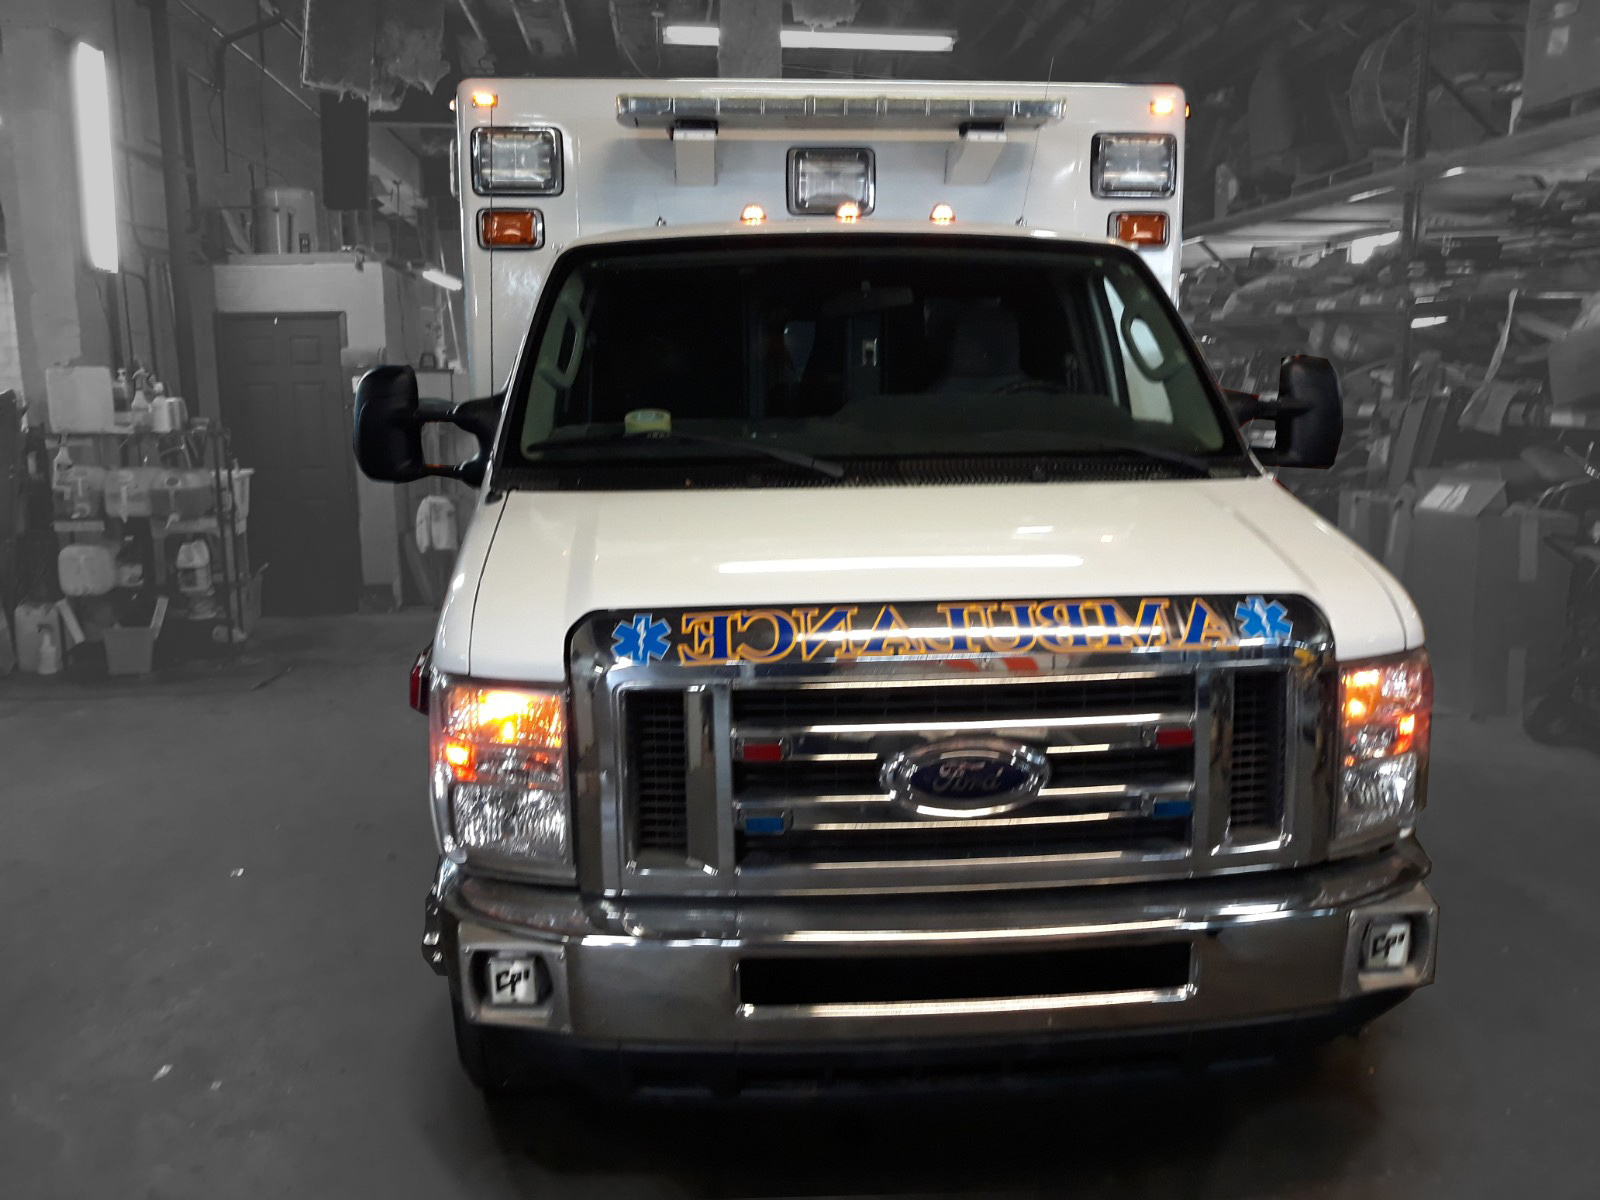 2012 Ford E450 Type 3 Gas Road Rescue Used Ambulance For Sale 01